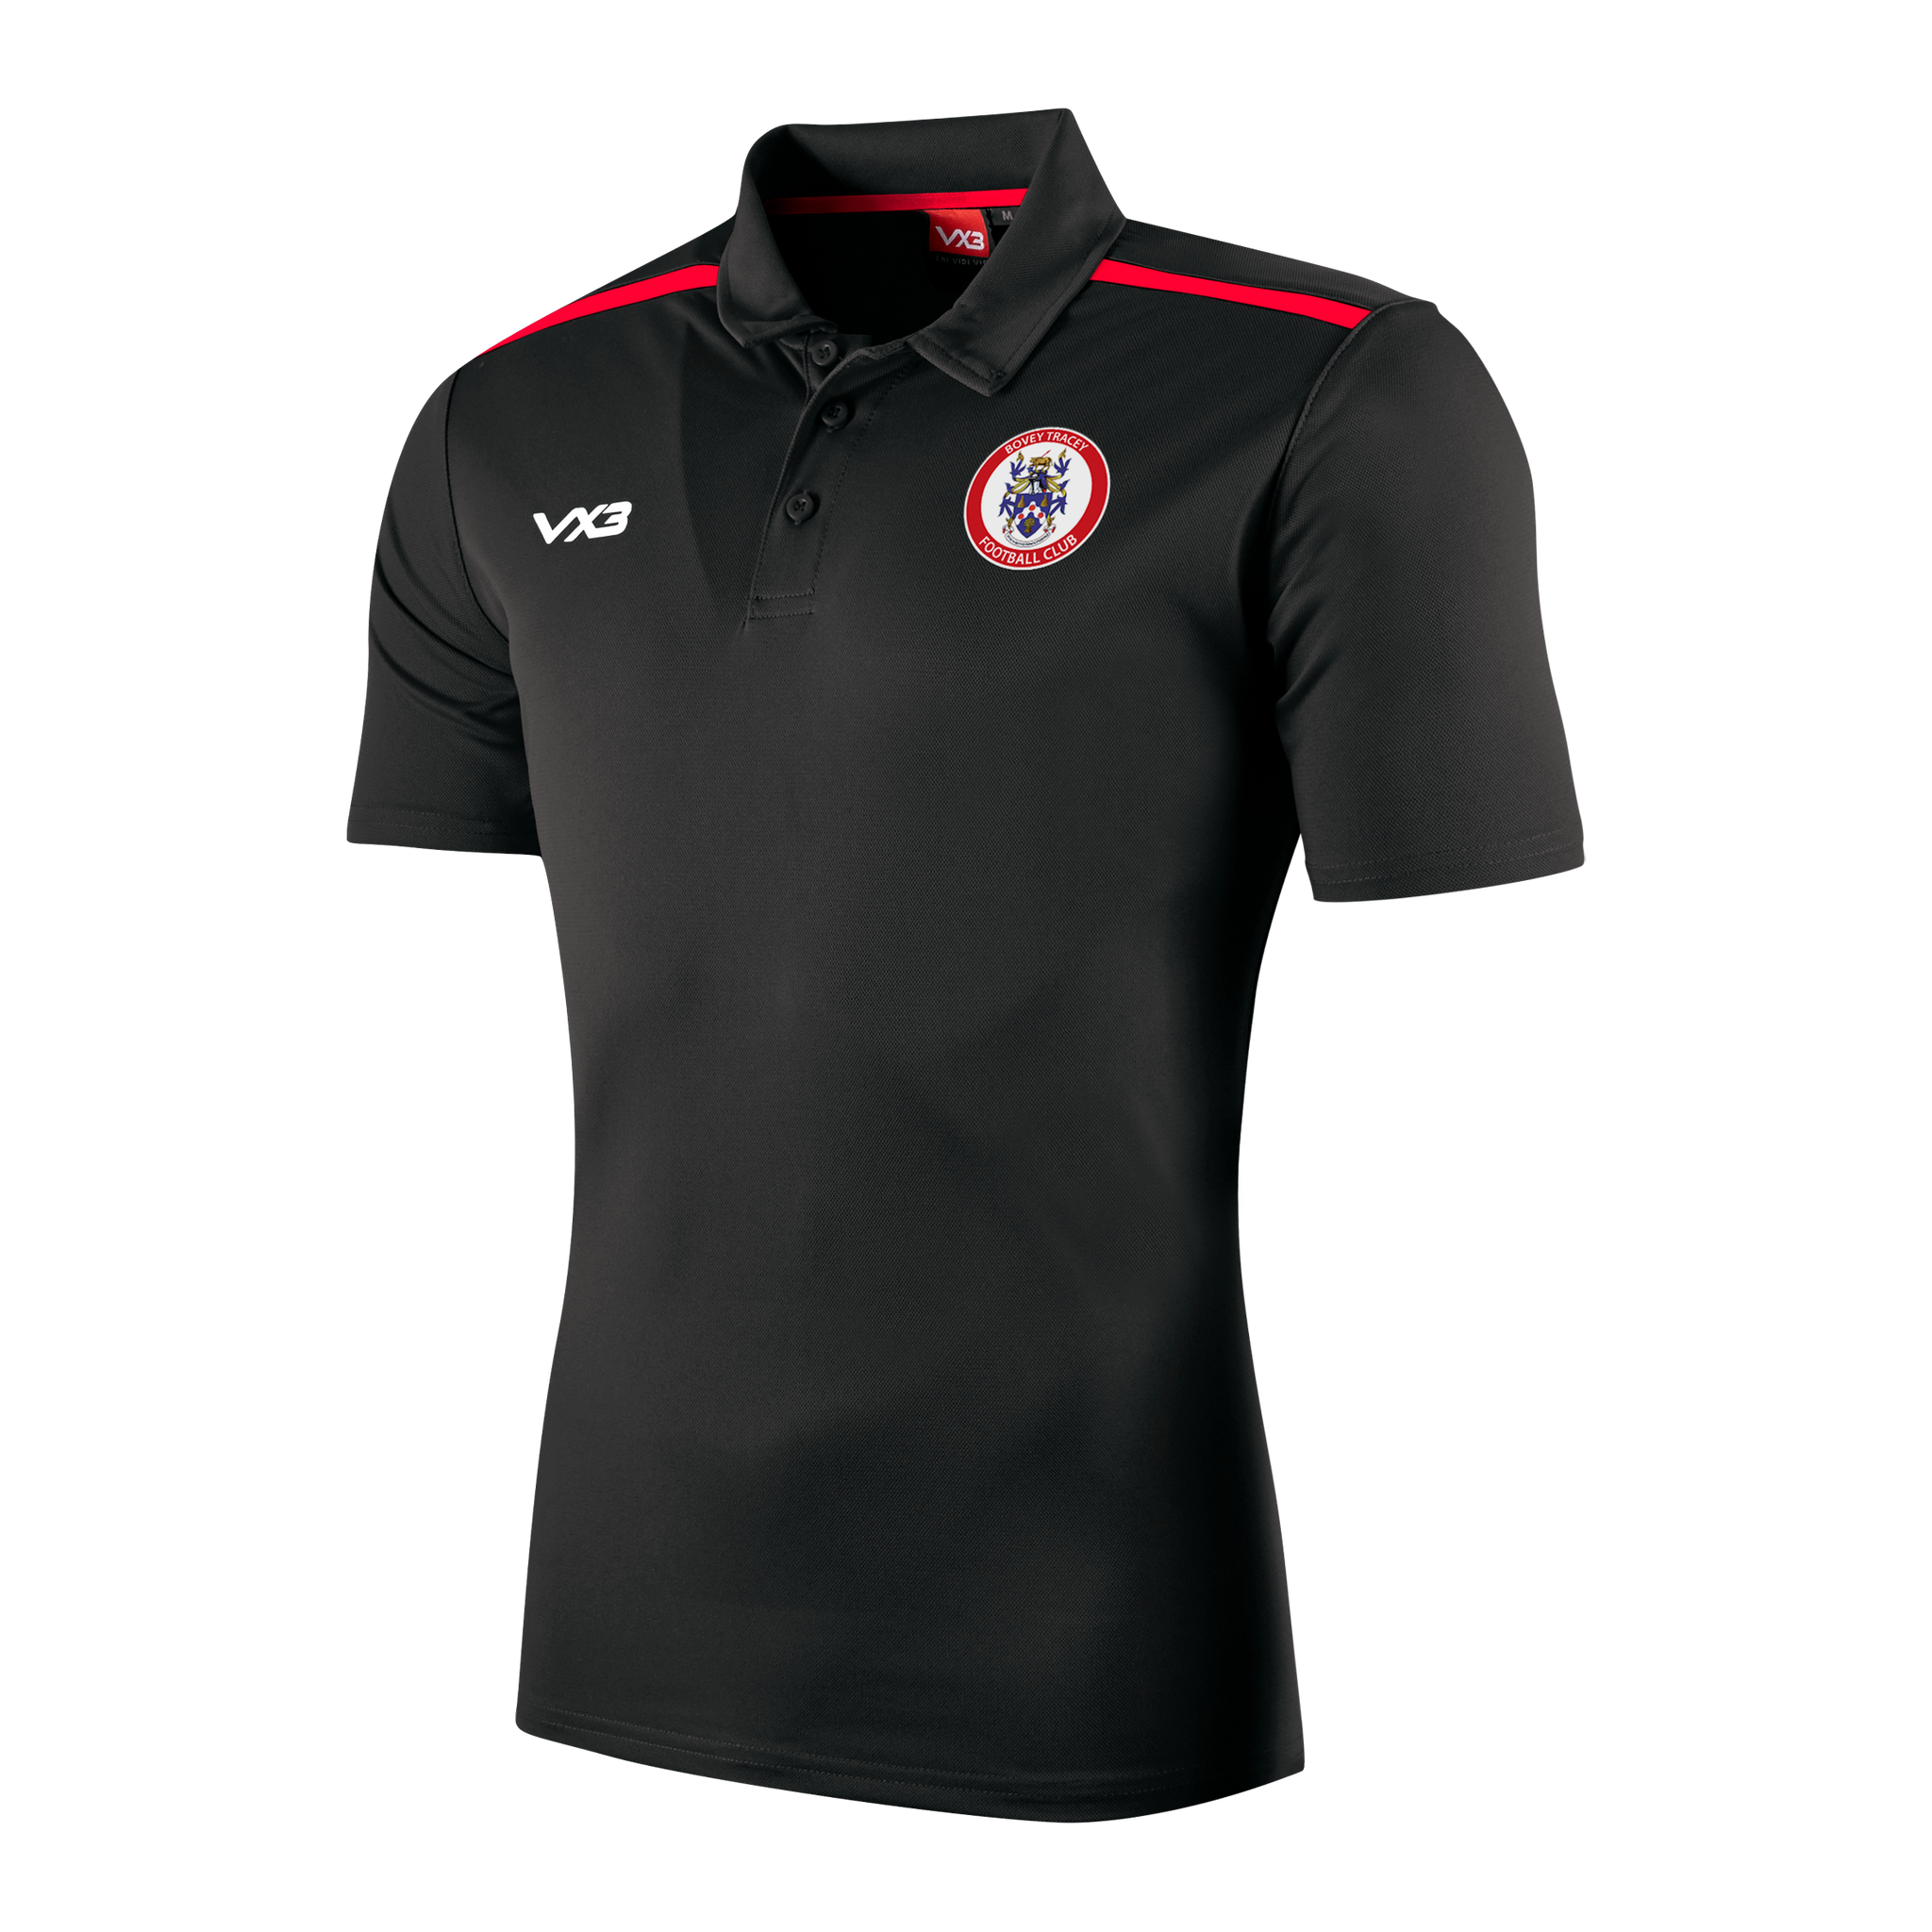 Bovey Tracey AFC Fortis Polo